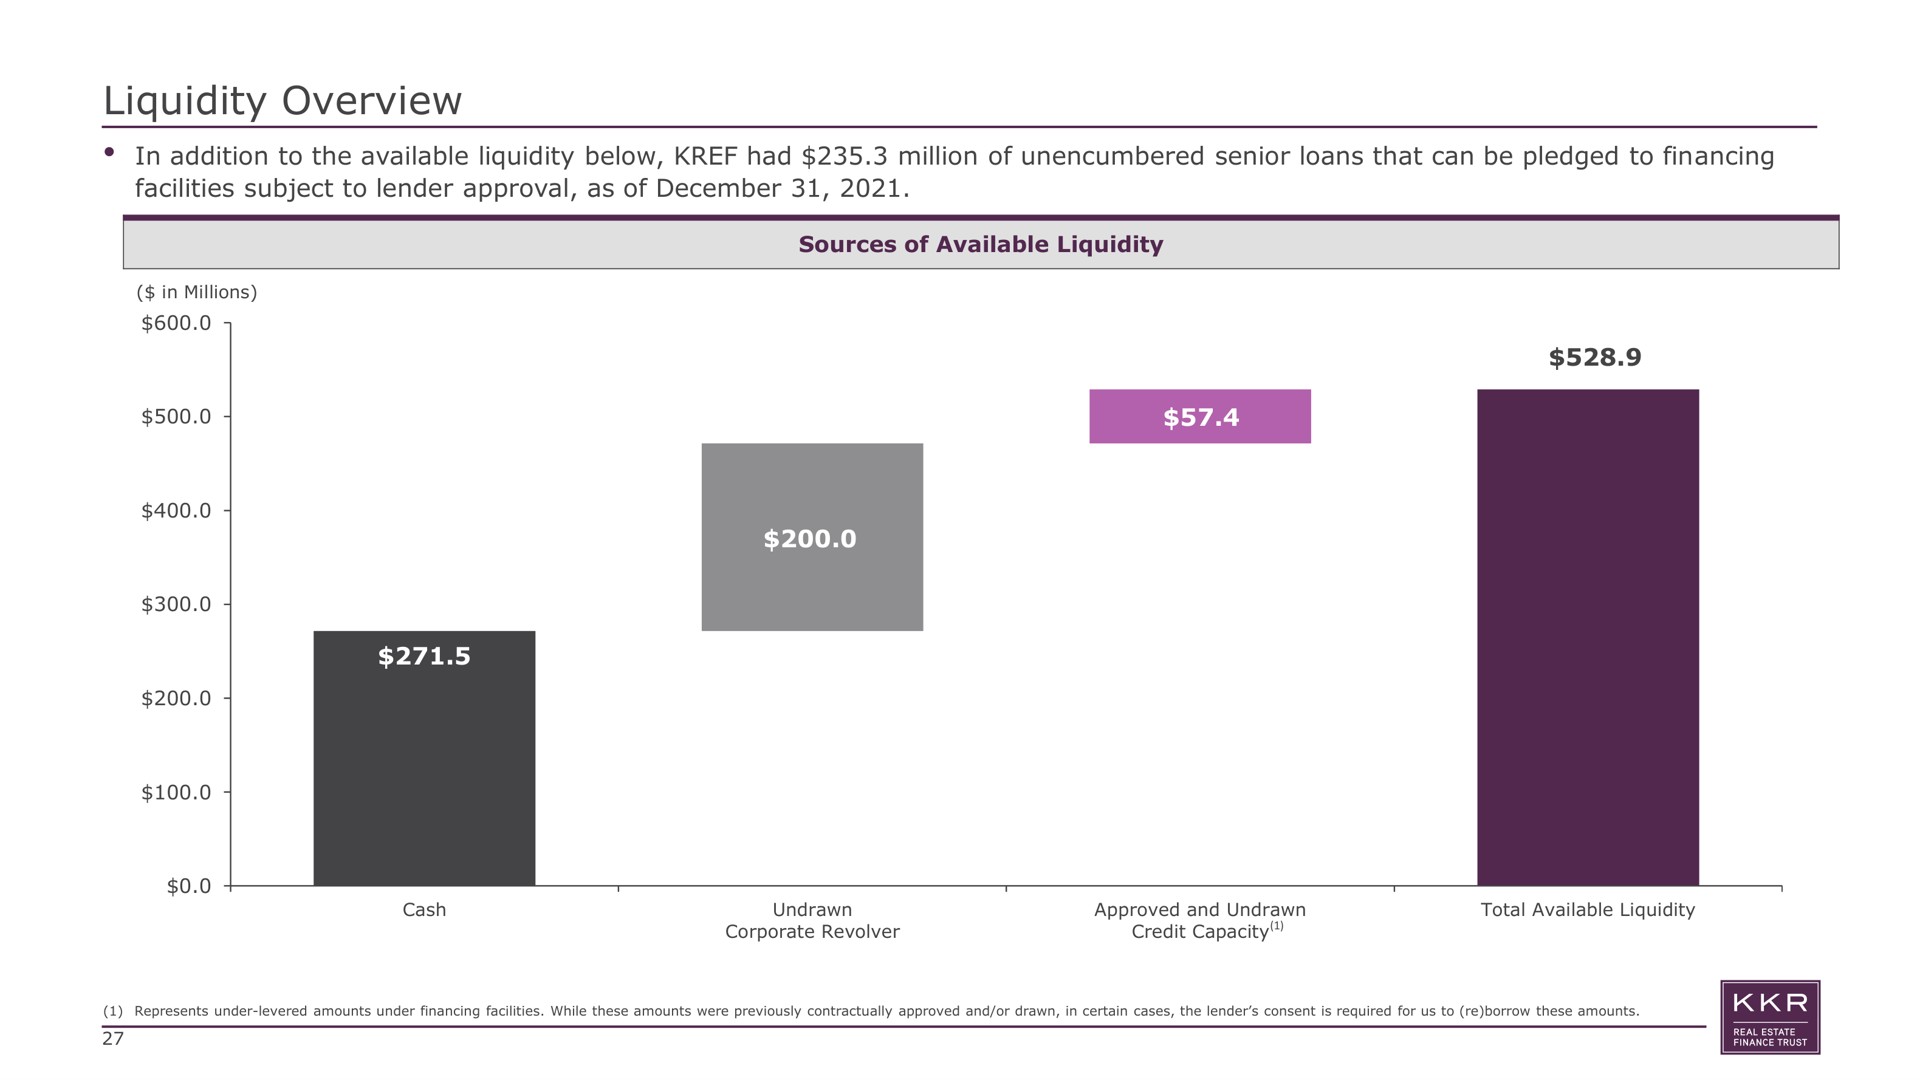 liquidity overview in addition to the available liquidity below had million of unencumbered senior loans that can be pledged to financing facilities subject to lender approval as of sources | KKR Real Estate Finance Trust